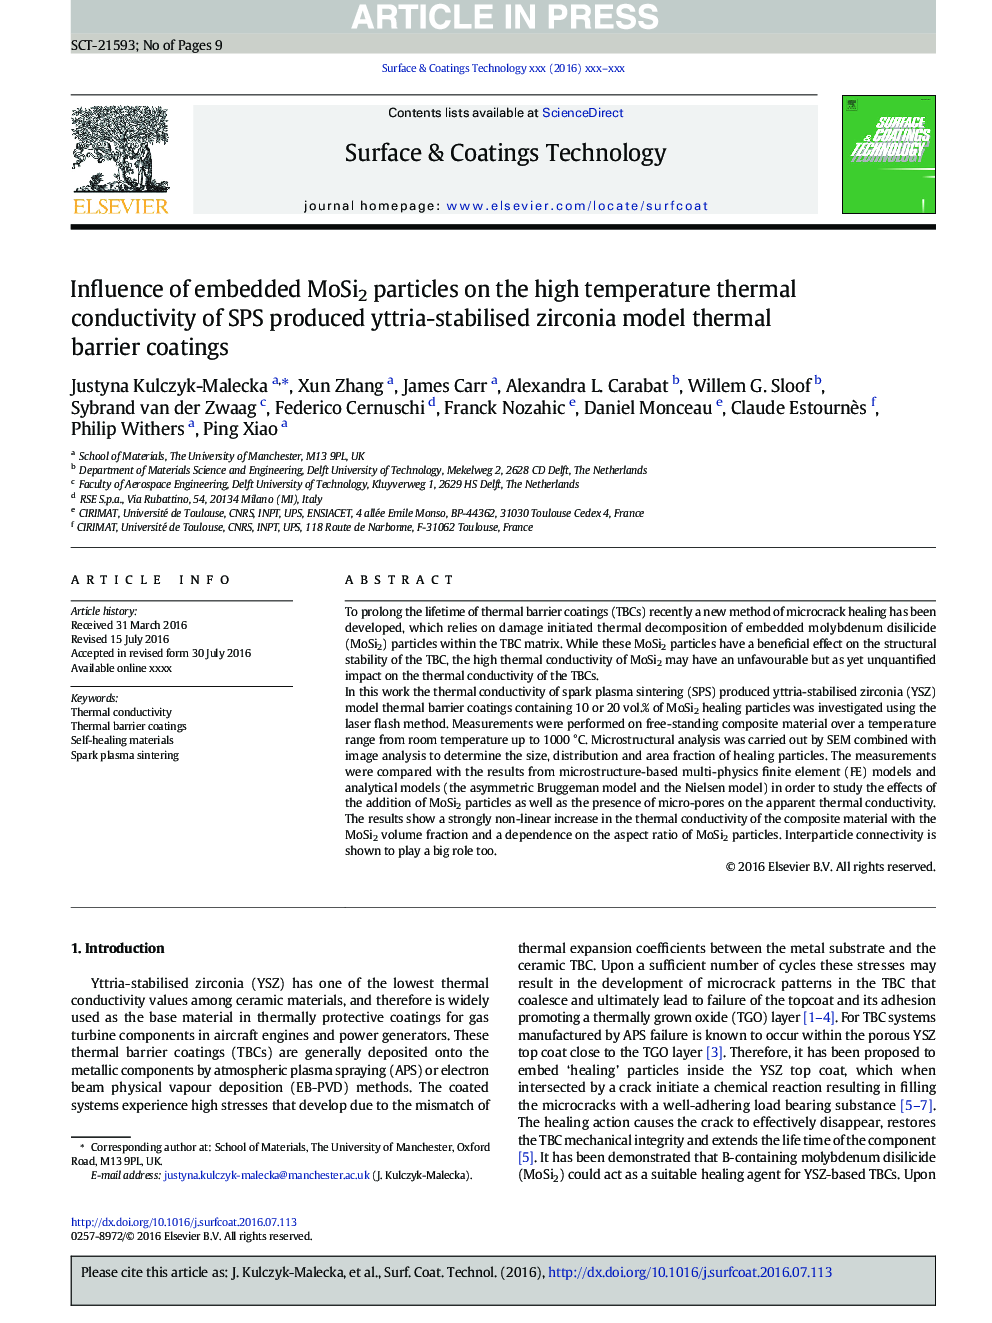 Influence of embedded MoSi2 particles on the high temperature thermal conductivity of SPS produced yttria-stabilised zirconia model thermal barrier coatings